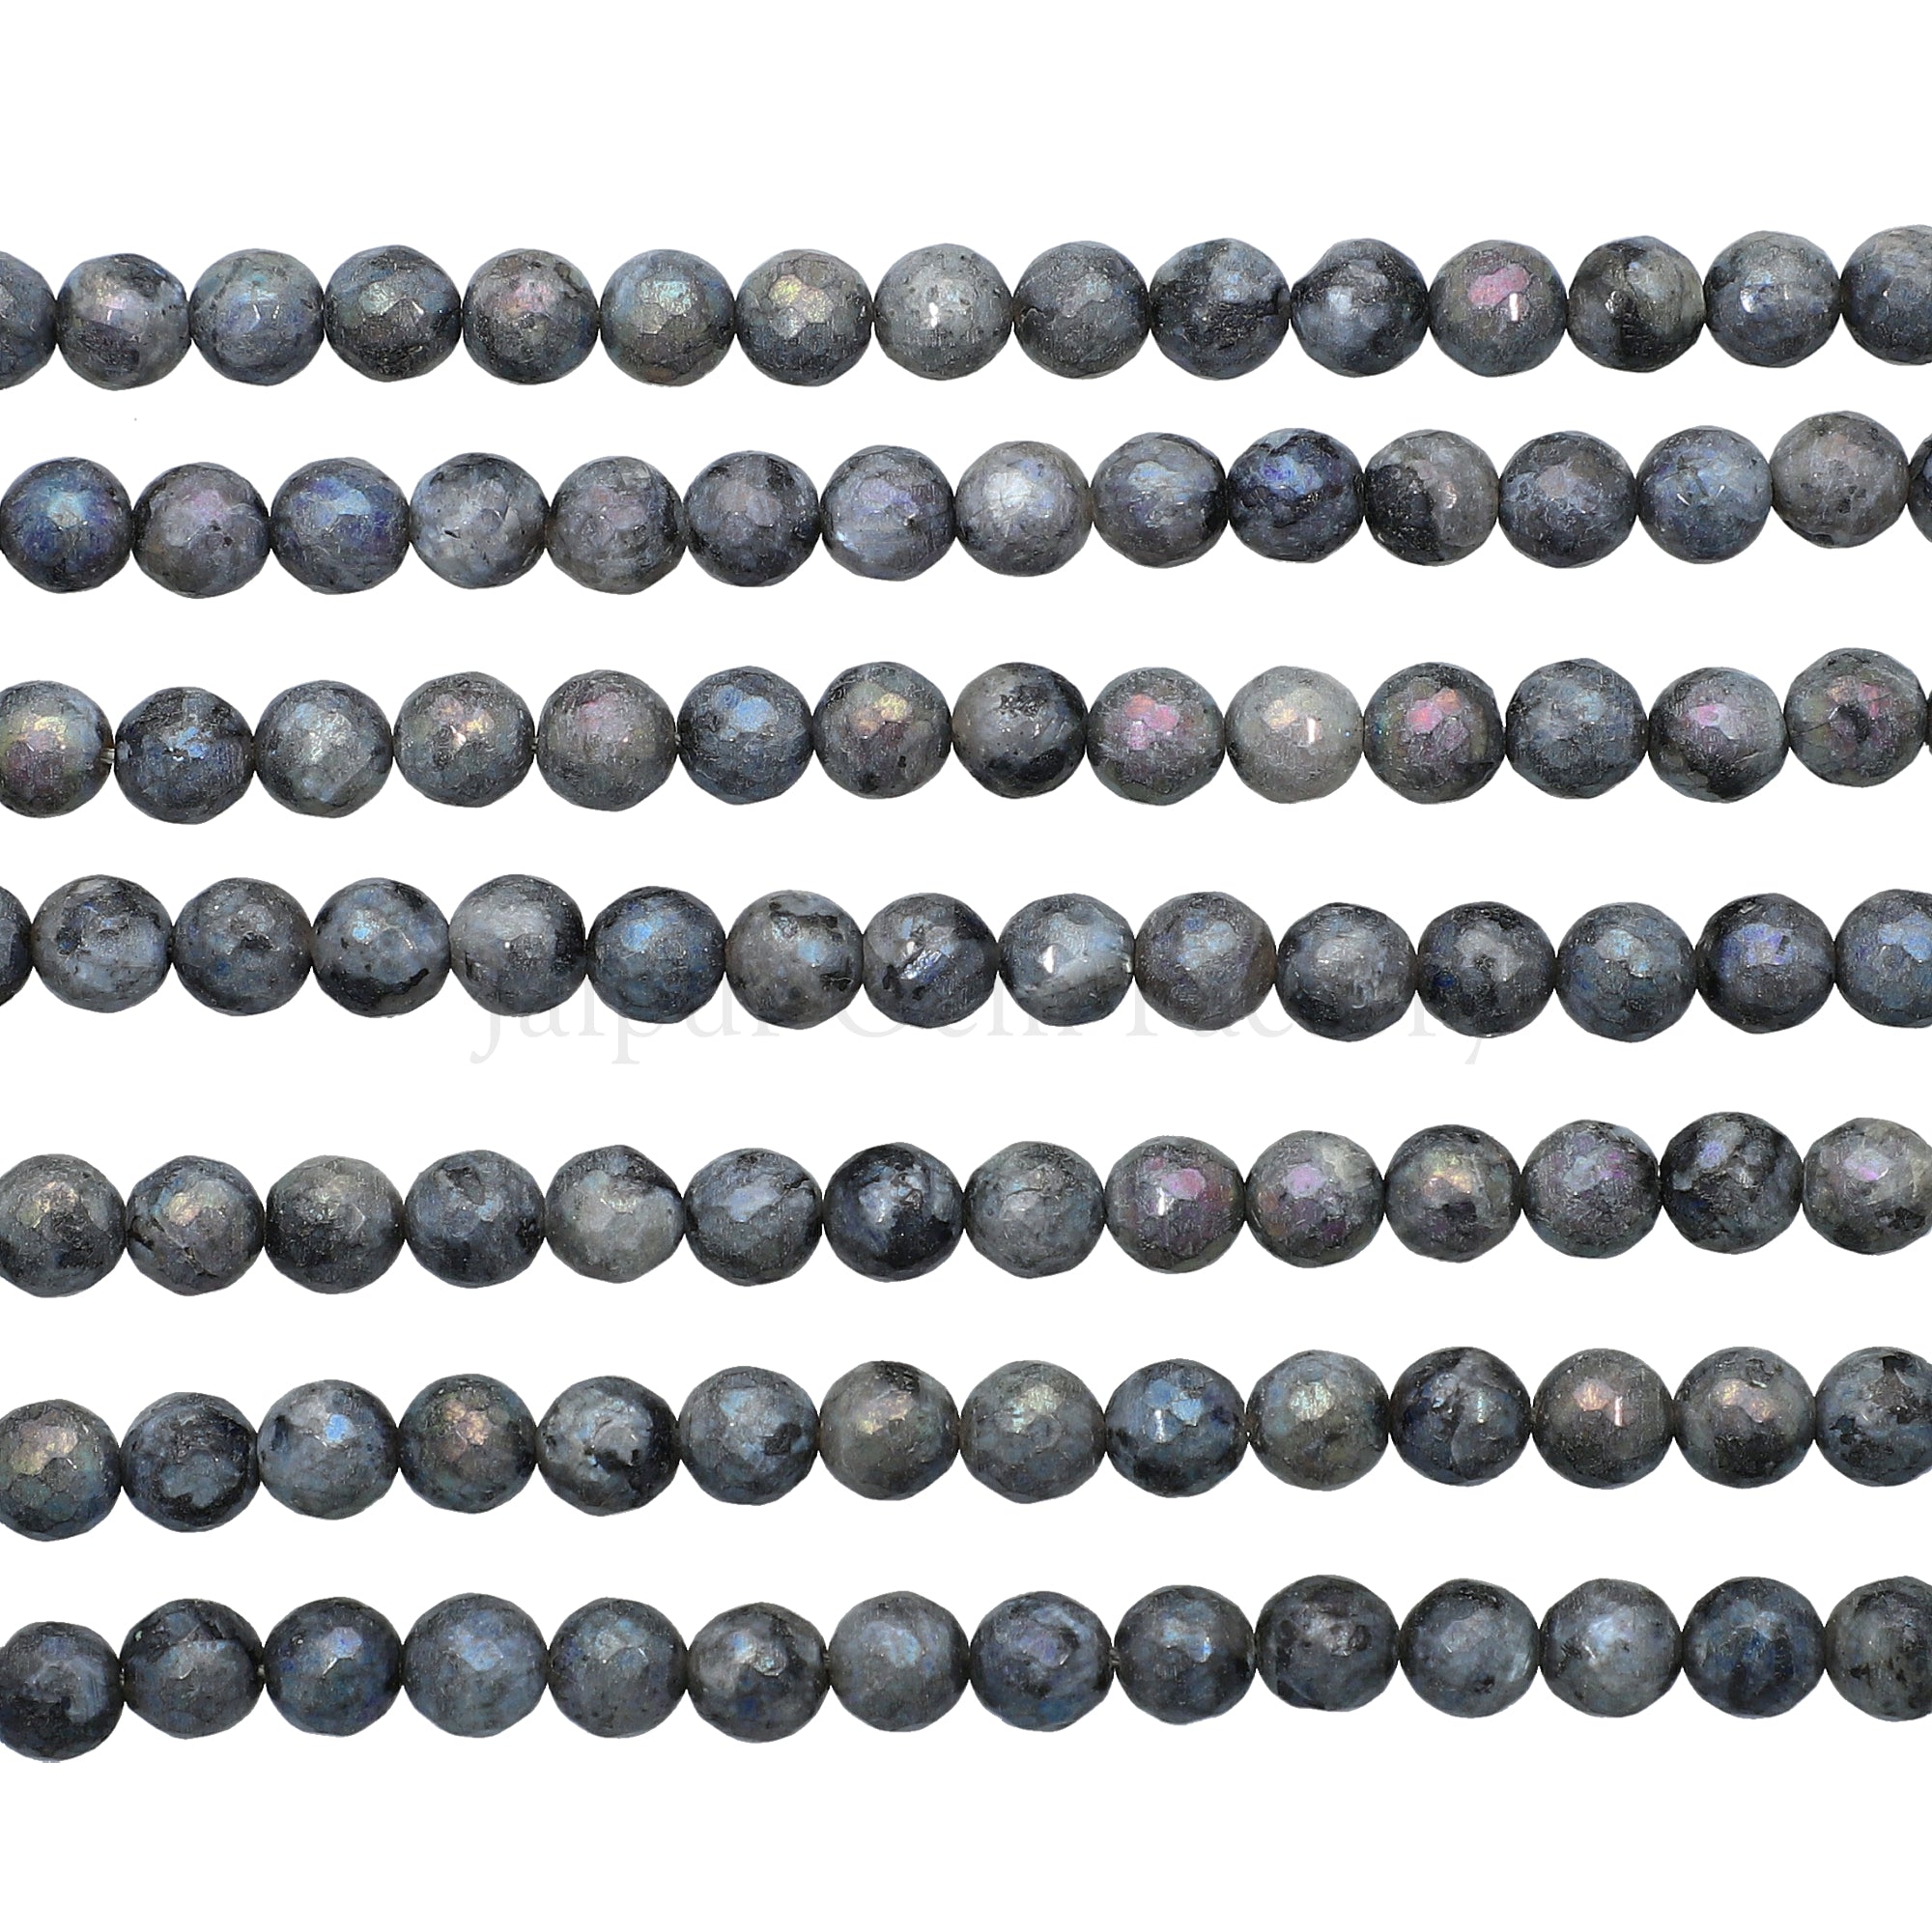 6 MM Mystic Coated Larvikite Faceted Round Beads 15 Inches Strand